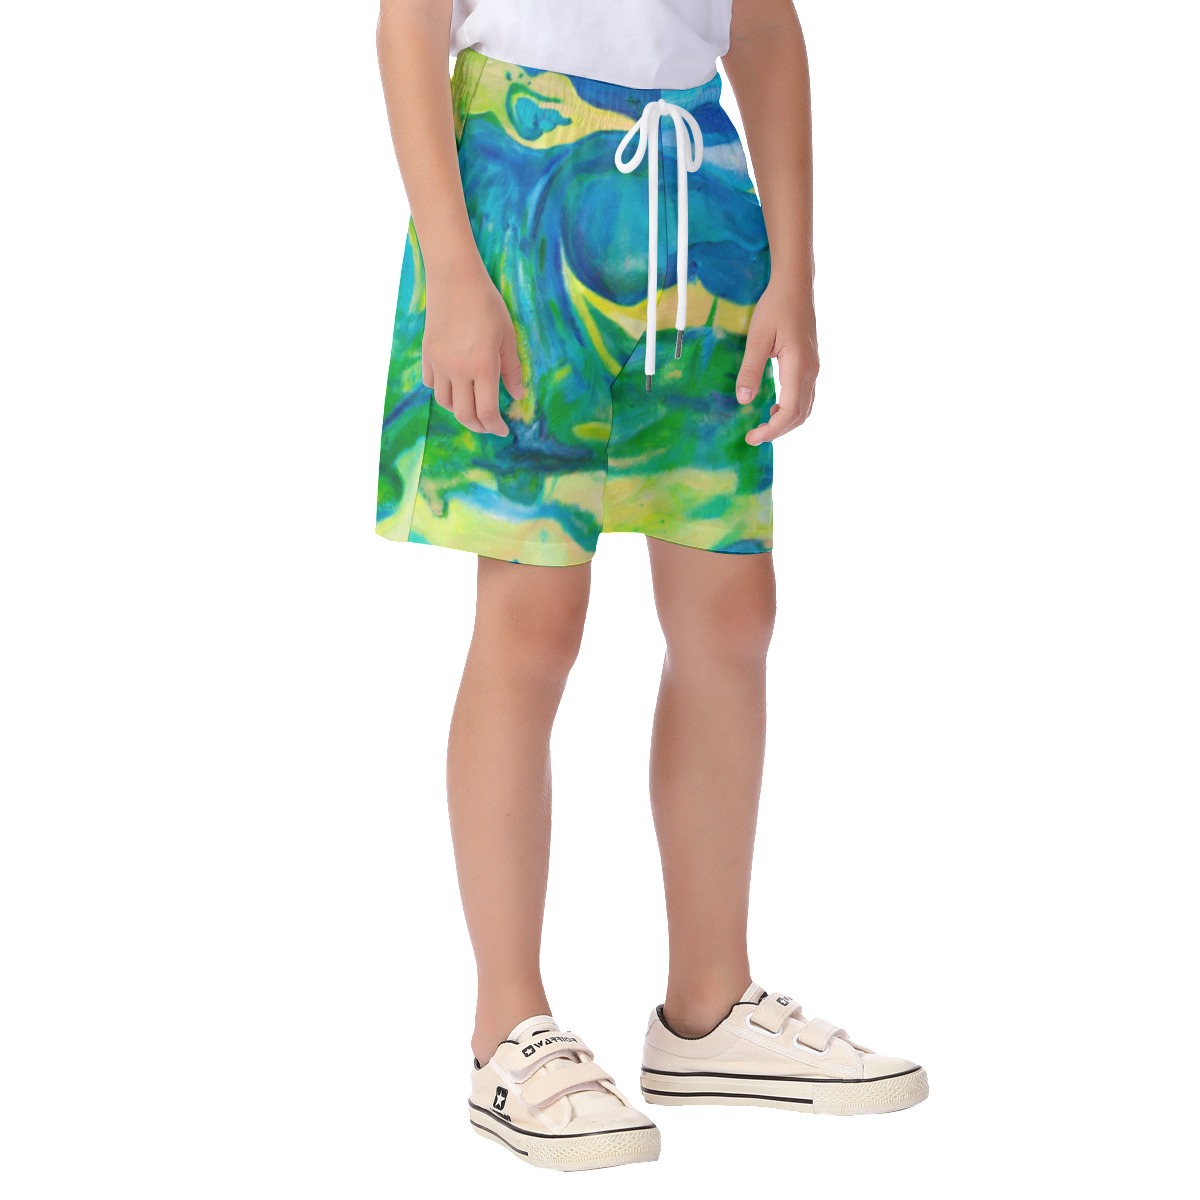 Kid’s Beach Shorts Under The Sea Collection